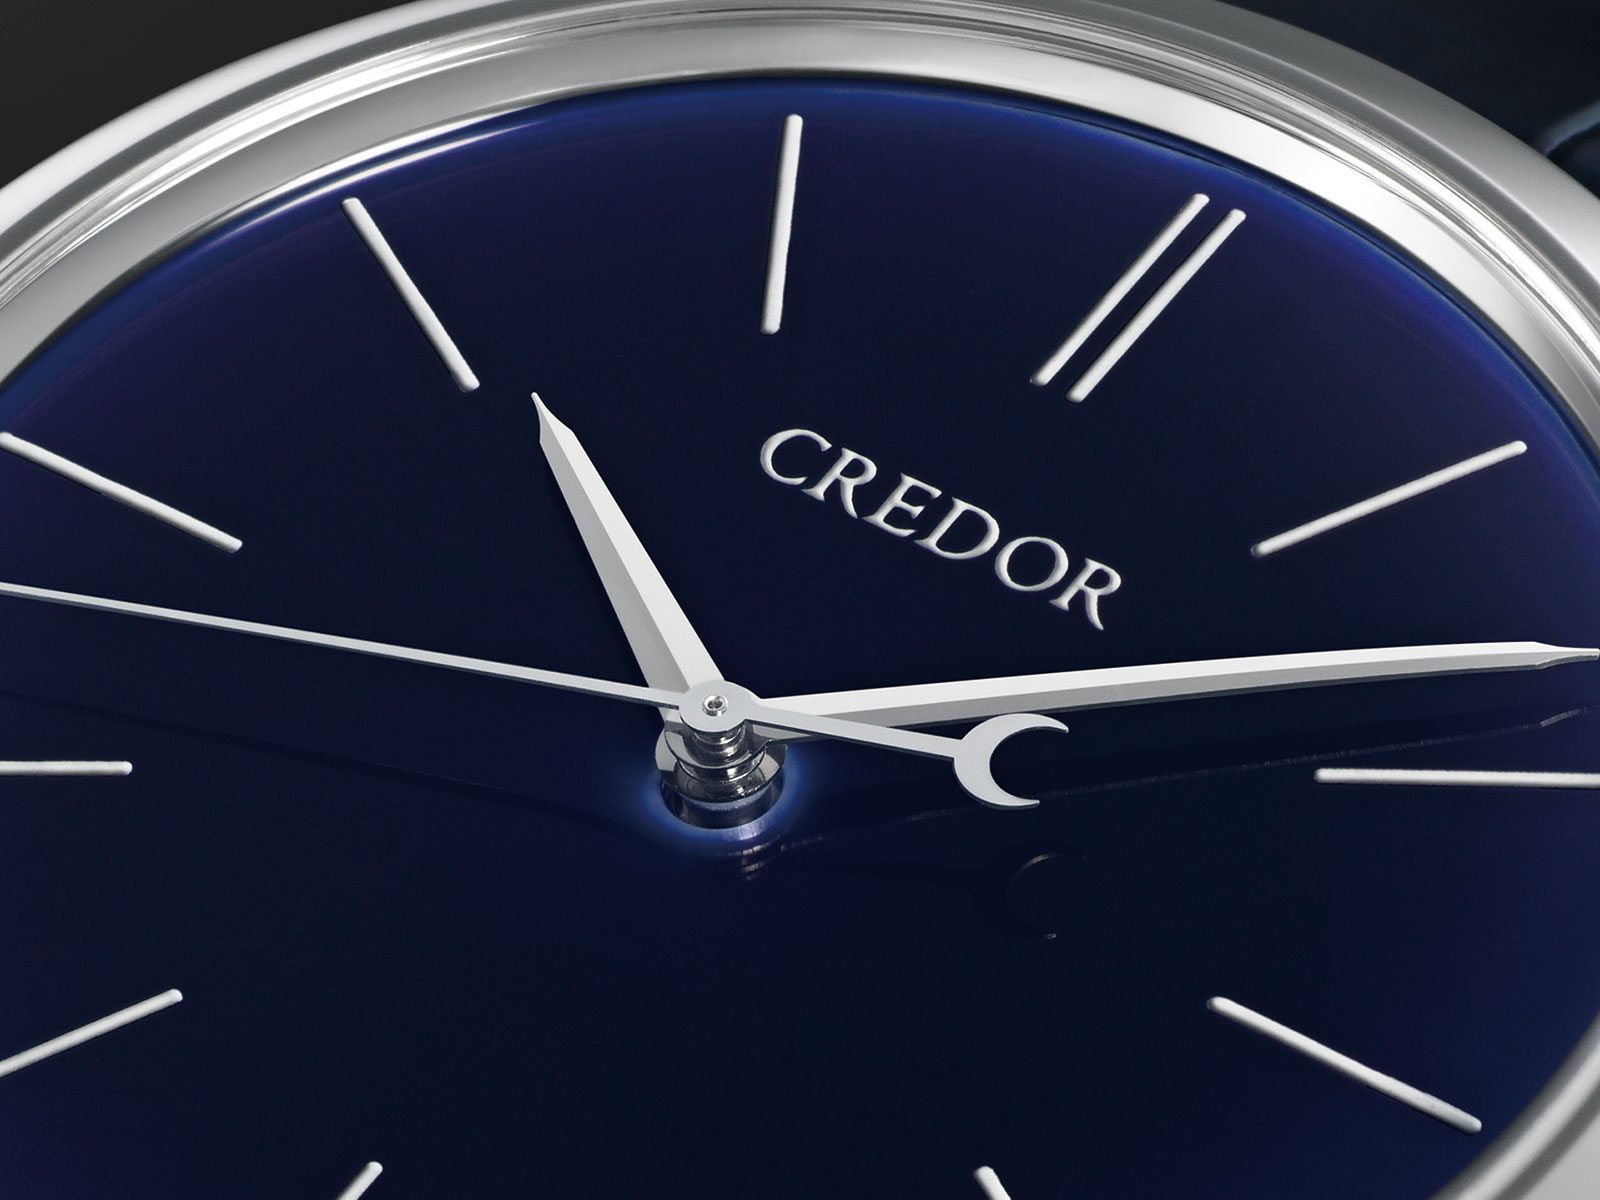 Seiko Introduces the Credor Eichi II with a Blue Porcelain Dial | SJX  Watches